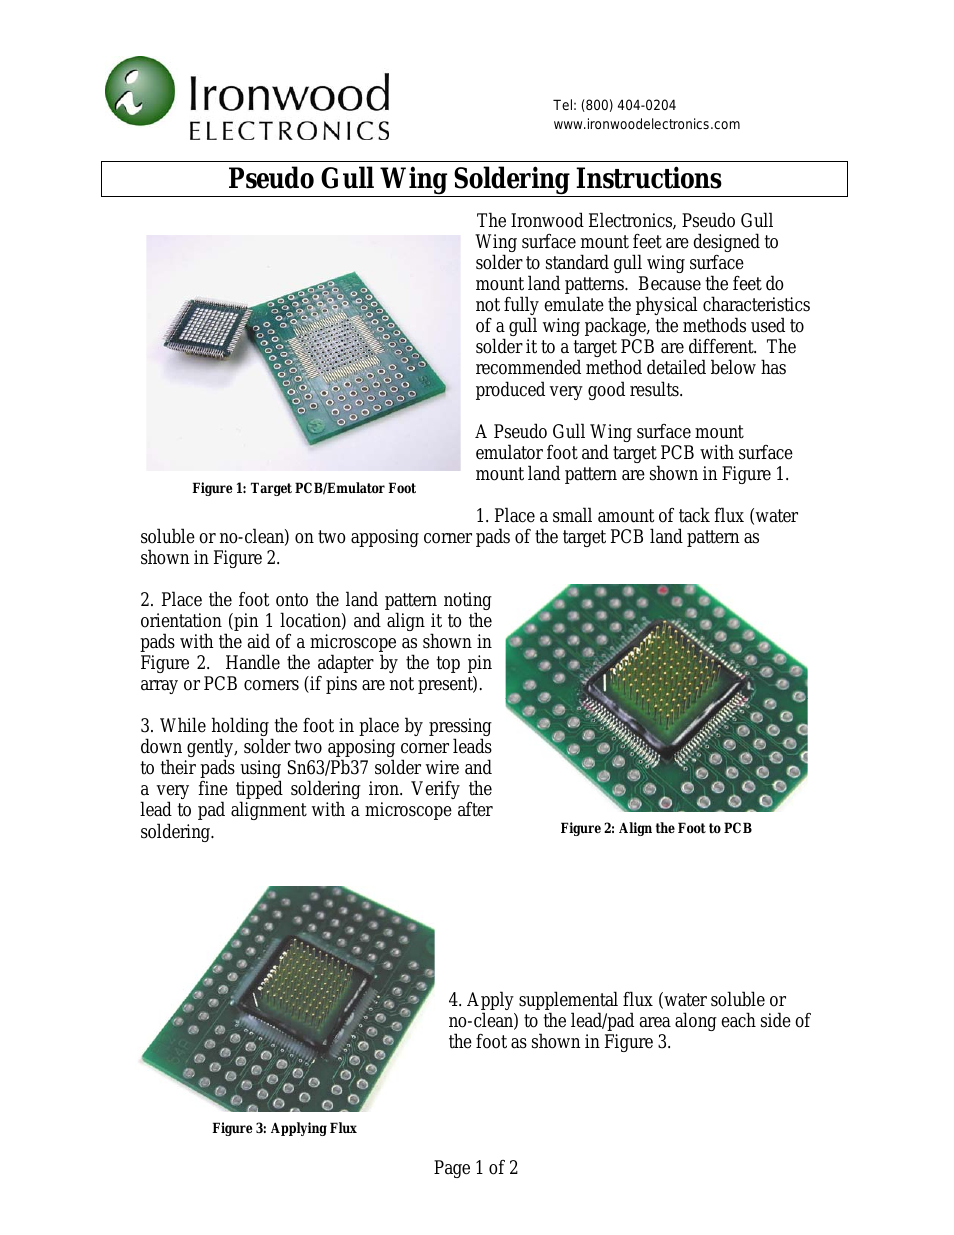 Pseudo Gull Wing Surface Mount Foot Soldering Instructions